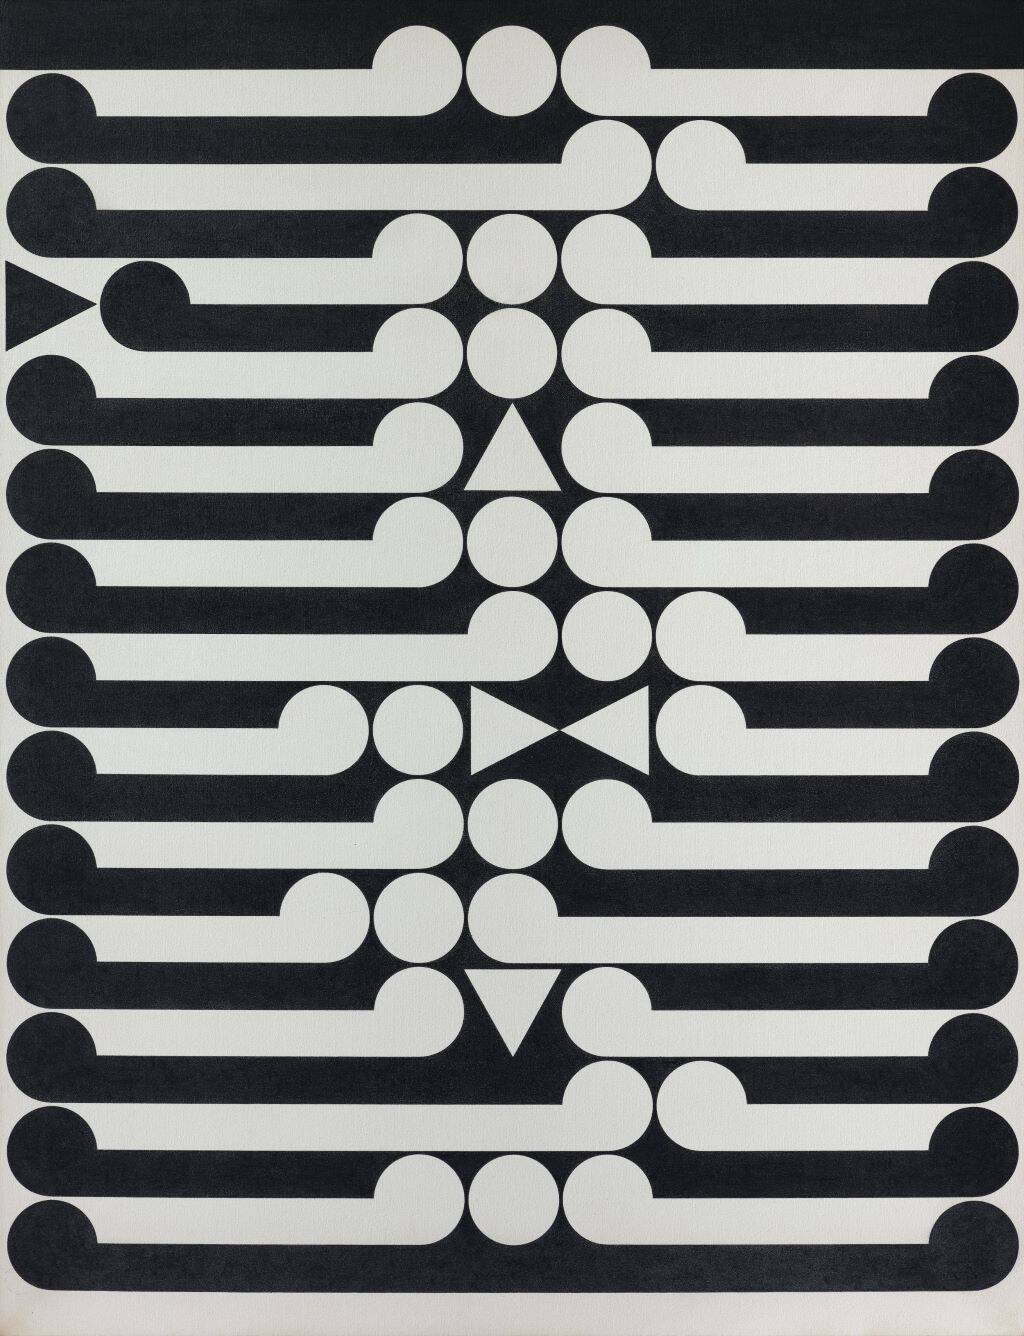 <p>Gordon Walters<em>, Painting No. 9</em>, 1965: Revised Version, 1981, PVA and acrylic on canvas, John Gellert Collection, Auckland<br />
&nbsp;</p>
